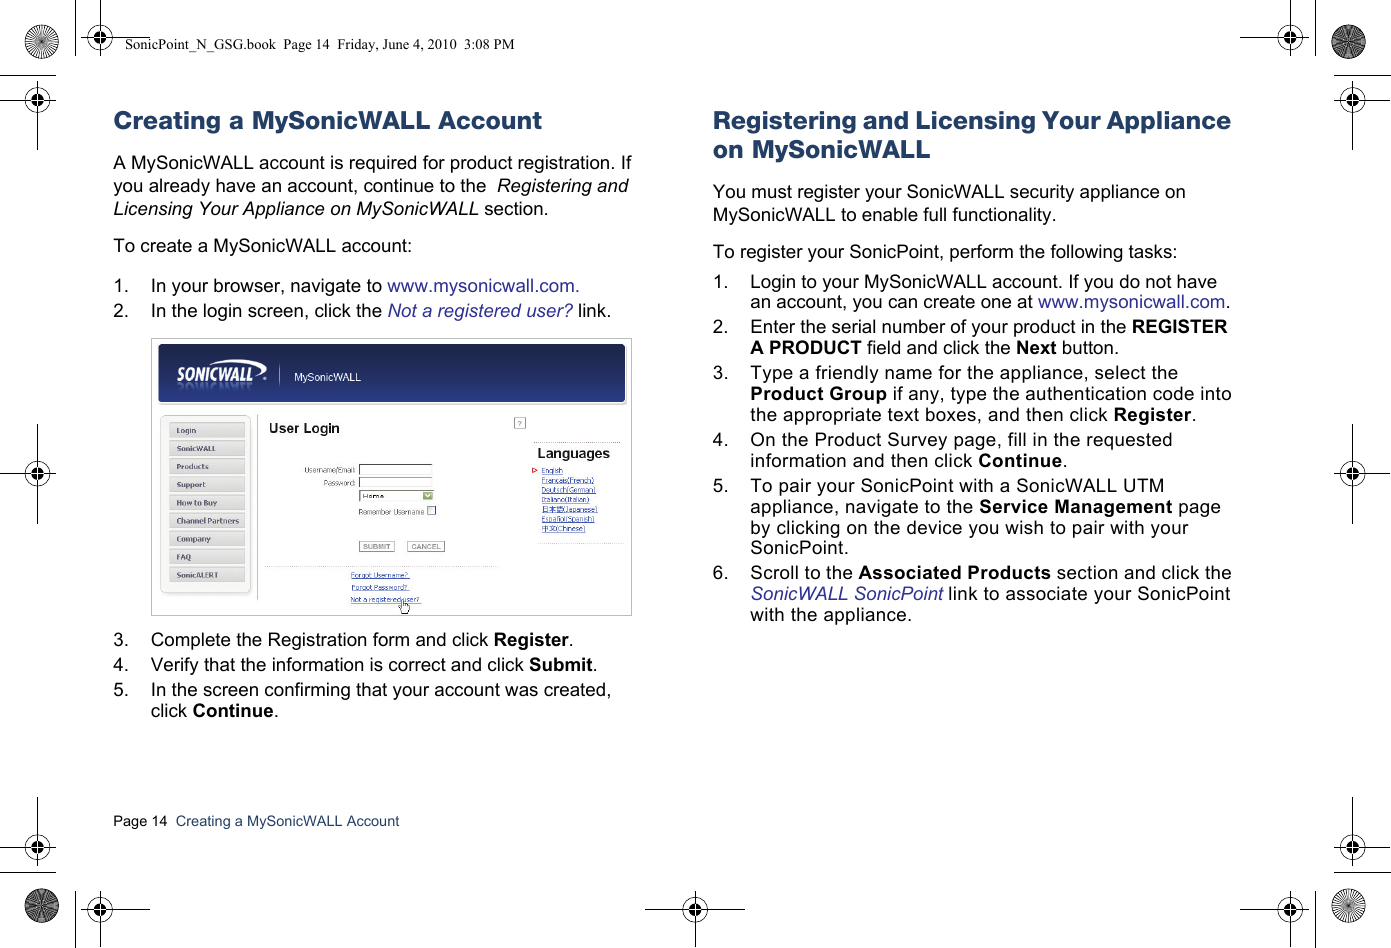 Page 14  Creating a MySonicWALL Account  Creating a MySonicWALL AccountA MySonicWALL account is required for product registration. If you already have an account, continue to the  Registering and Licensing Your Appliance on MySonicWALL section.To create a MySonicWALL account:1. In your browser, navigate to www.mysonicwall.com.2. In the login screen, click the Not a registered user? link.3. Complete the Registration form and click Register.4. Verify that the information is correct and click Submit.5. In the screen confirming that your account was created, click Continue.Registering and Licensing Your Appliance on MySonicWALLYou must register your SonicWALL security appliance on MySonicWALL to enable full functionality. To register your SonicPoint, perform the following tasks:1. Login to your MySonicWALL account. If you do not have an account, you can create one at www.mysonicwall.com.2. Enter the serial number of your product in the REGISTER A PRODUCT field and click the Next button.3. Type a friendly name for the appliance, select the Product Group if any, type the authentication code into the appropriate text boxes, and then click Register.4. On the Product Survey page, fill in the requested information and then click Continue.5. To pair your SonicPoint with a SonicWALL UTM appliance, navigate to the Service Management page by clicking on the device you wish to pair with your SonicPoint.6. Scroll to the Associated Products section and click the SonicWALL SonicPoint link to associate your SonicPoint with the appliance.SonicPoint_N_GSG.book  Page 14  Friday, June 4, 2010  3:08 PM